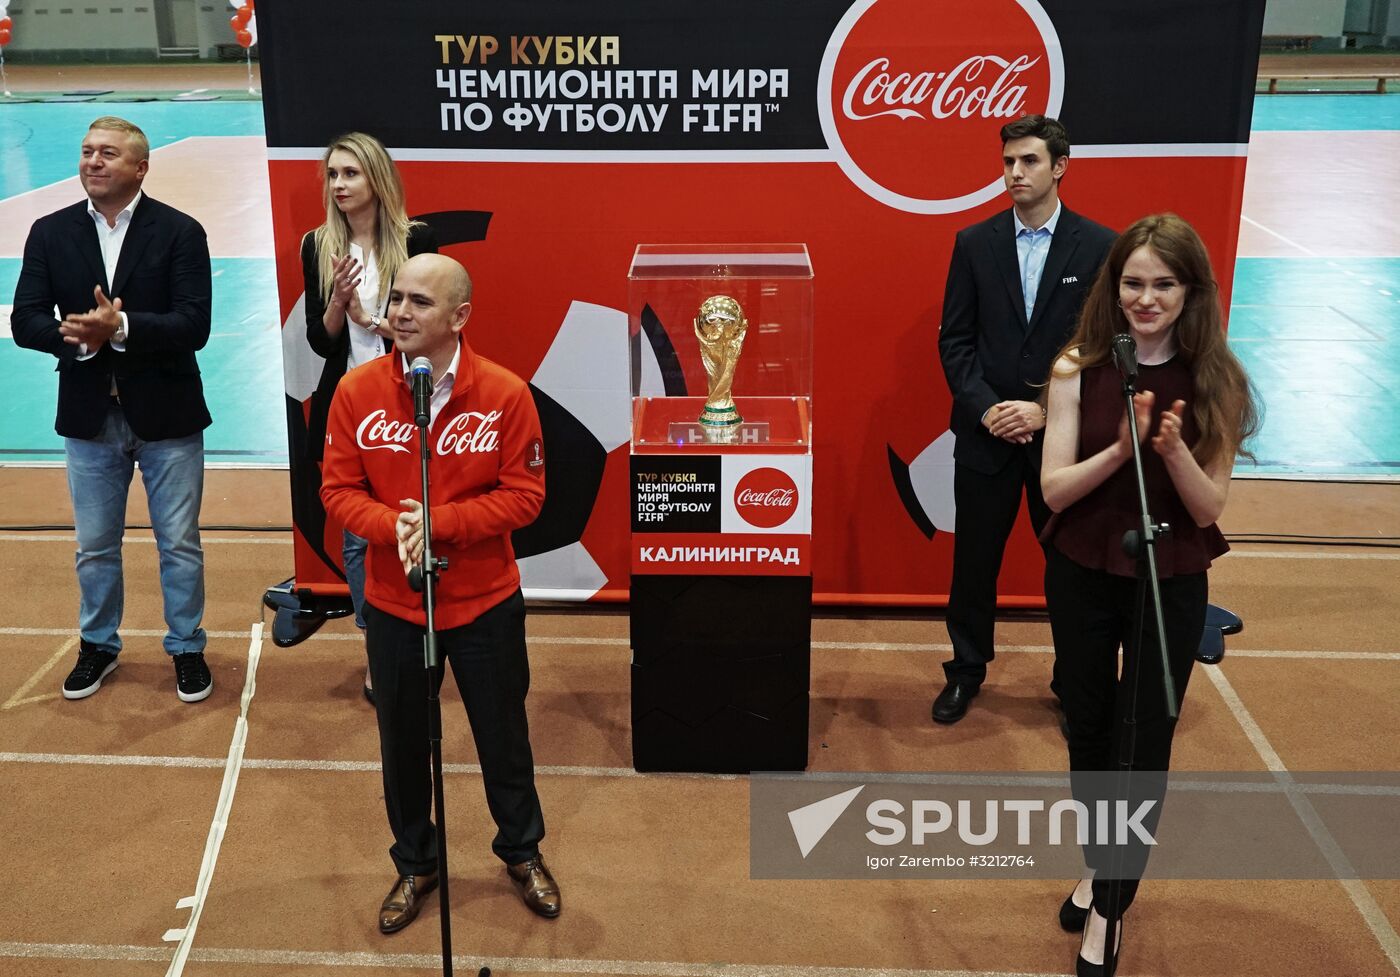 2018 FIFA World Cup trophy presented in Kaliningrad